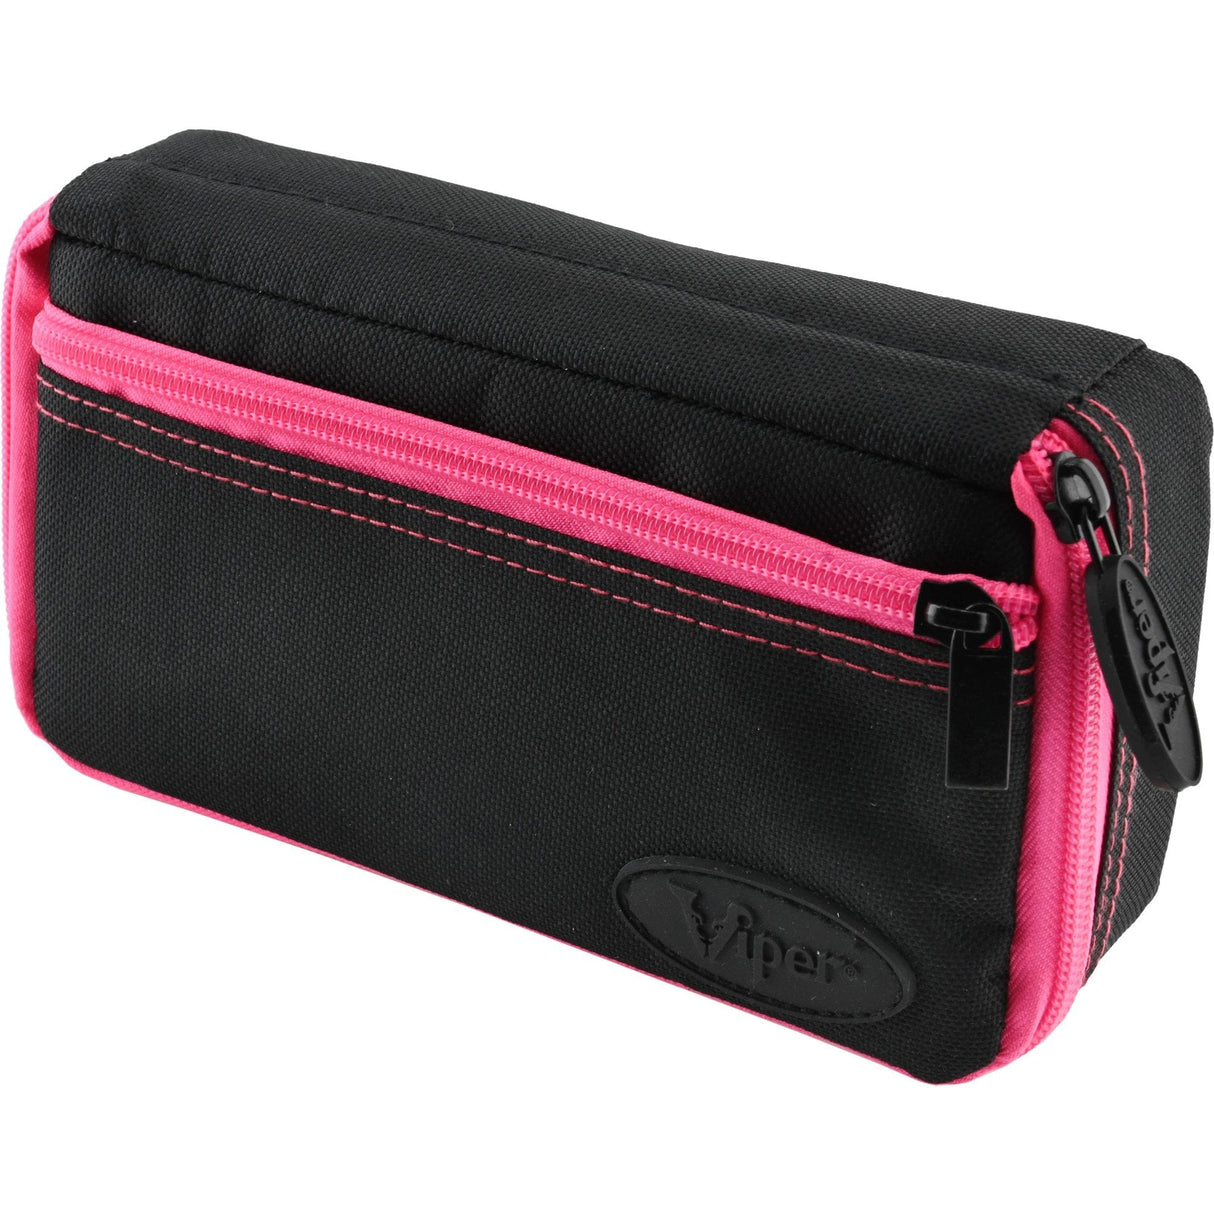 Viper Plazma Dart Case - Extremely Tough & Durable Pink